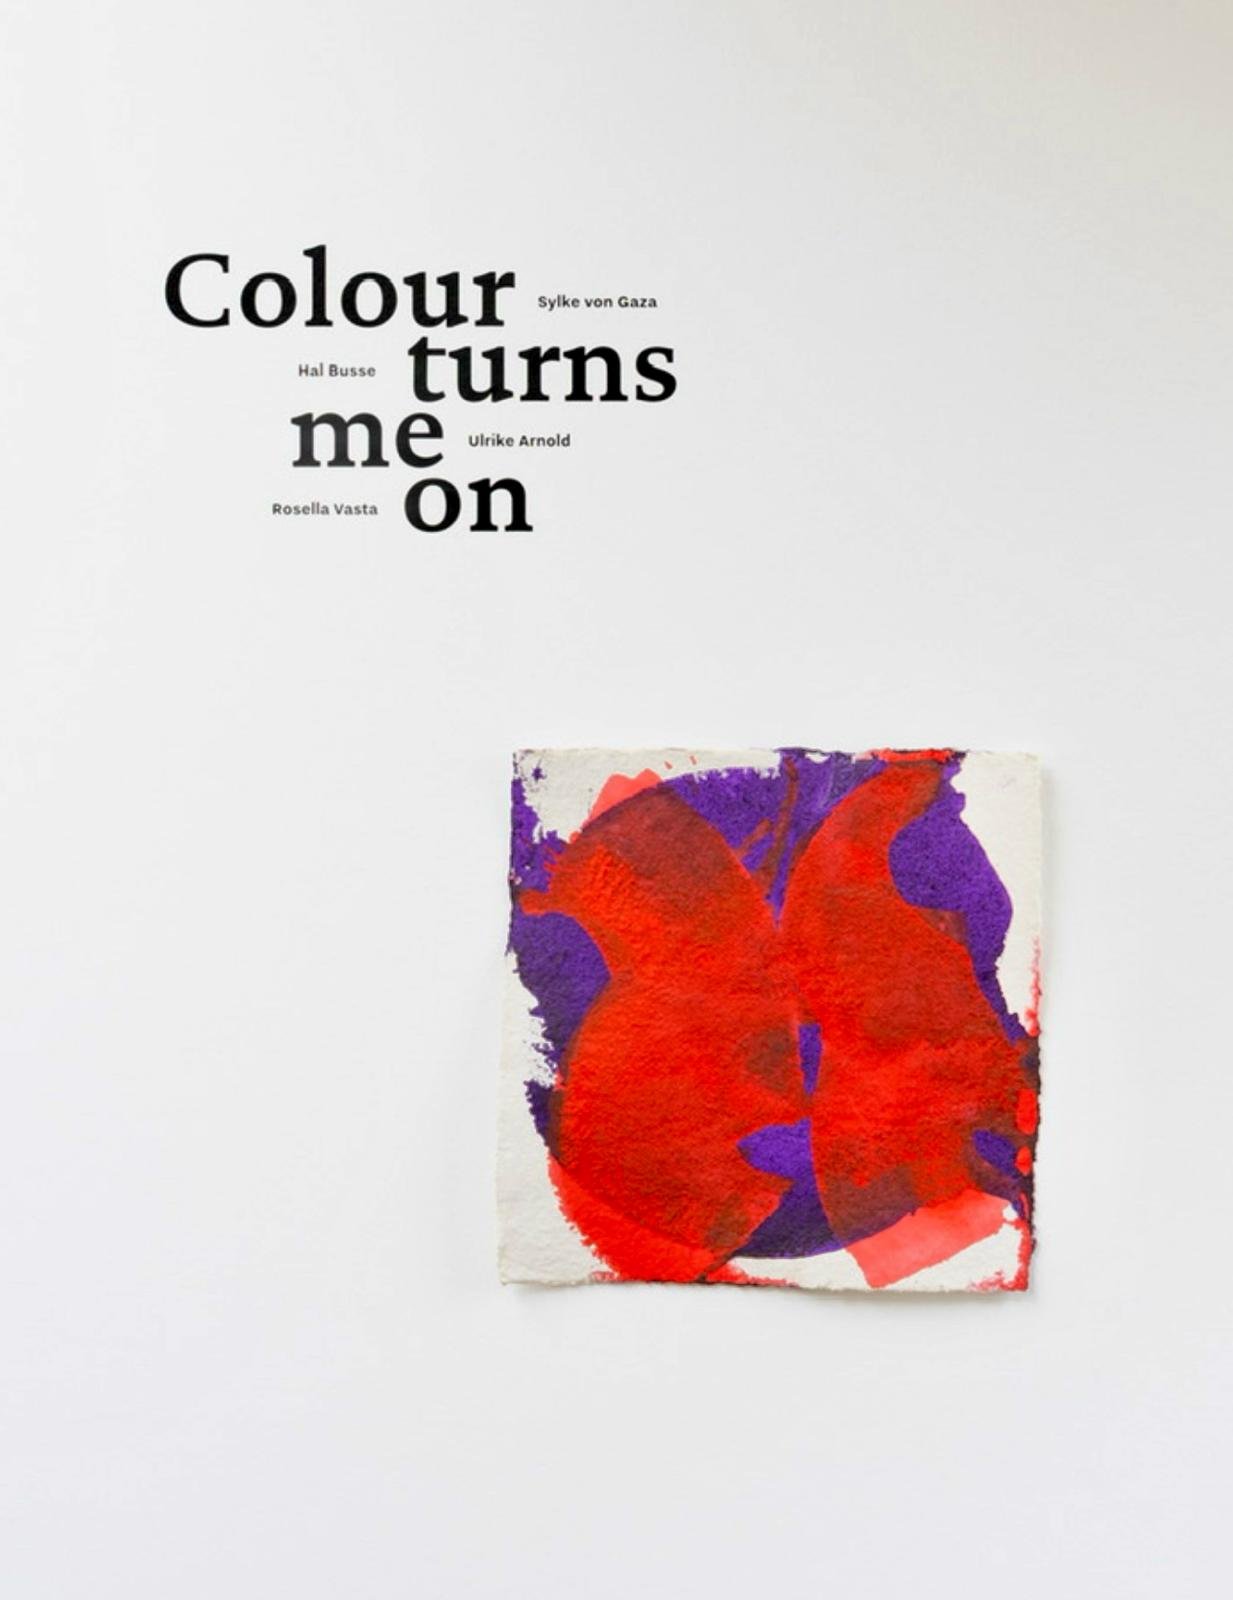 Gallery Beck & Eggeling - Colour Turns Me On with Sylke von Gaza 2024.jpg